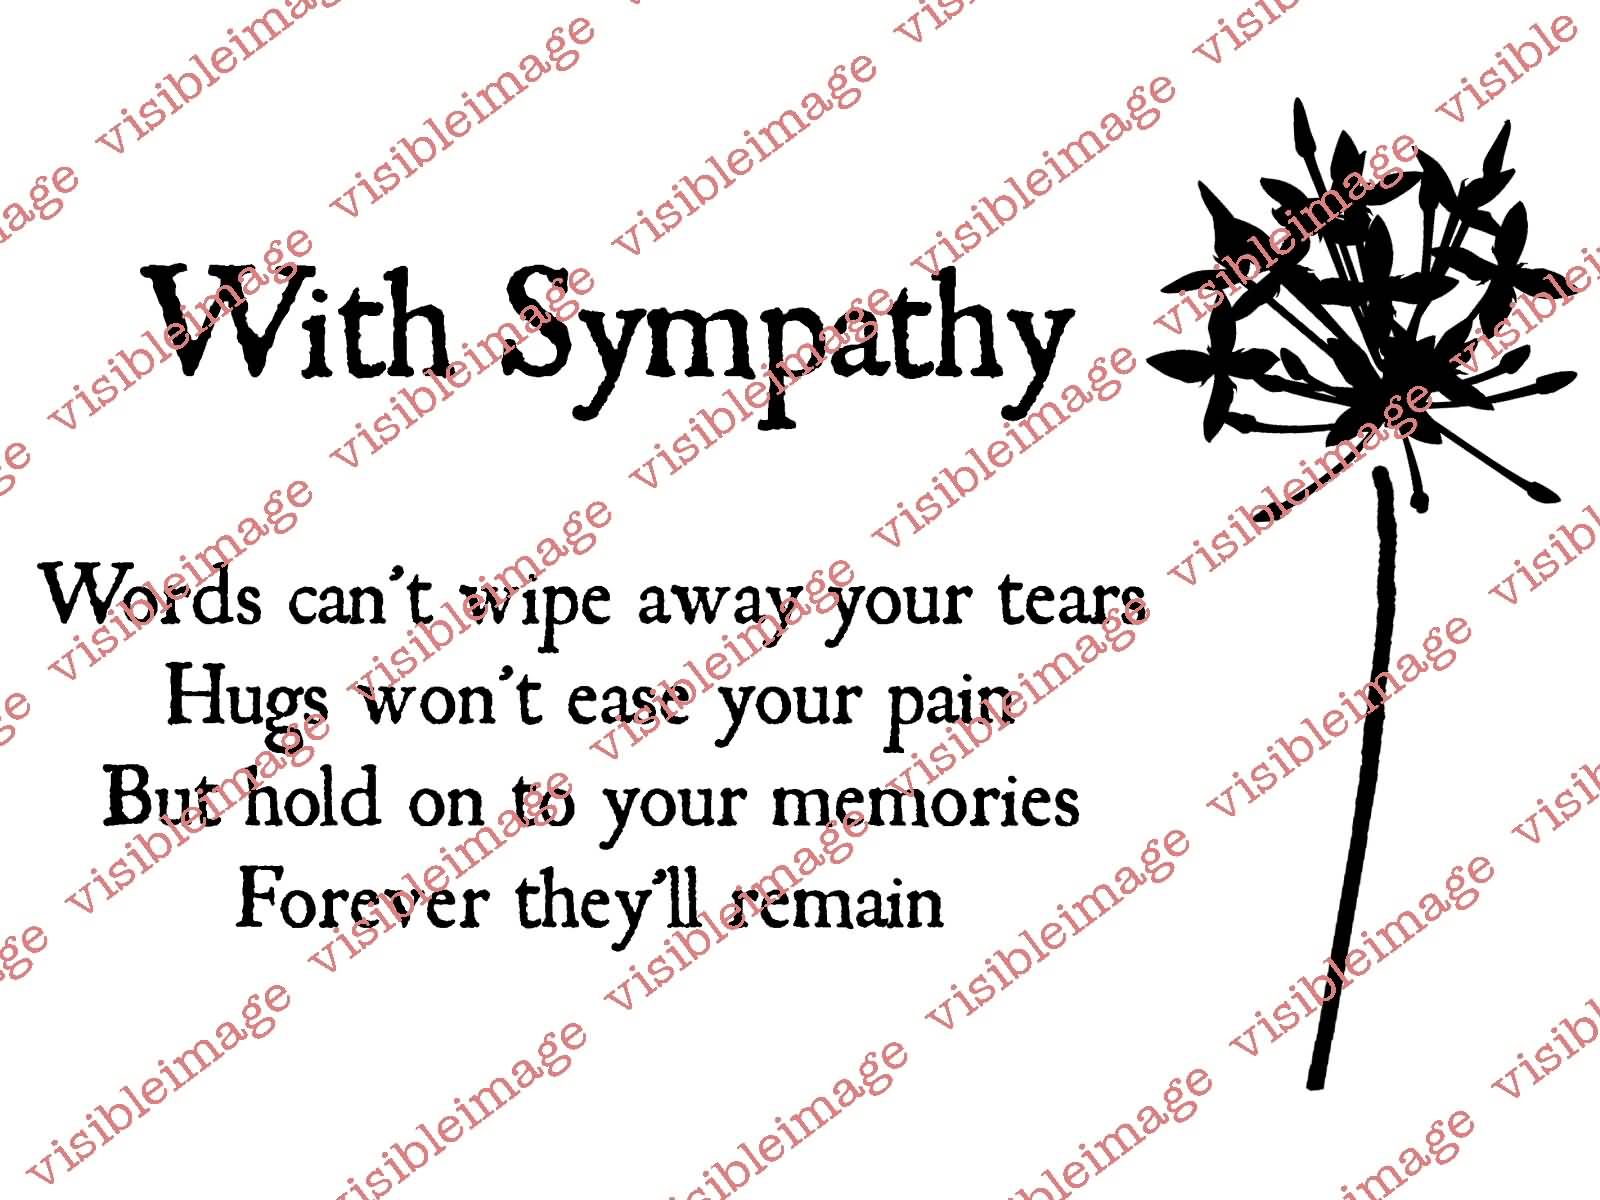 With Sympathy Words Can't Wipe Away Your Tears Hugs Won't Ease Your Pain But Hold On To Your Memories Forever They'll Remain